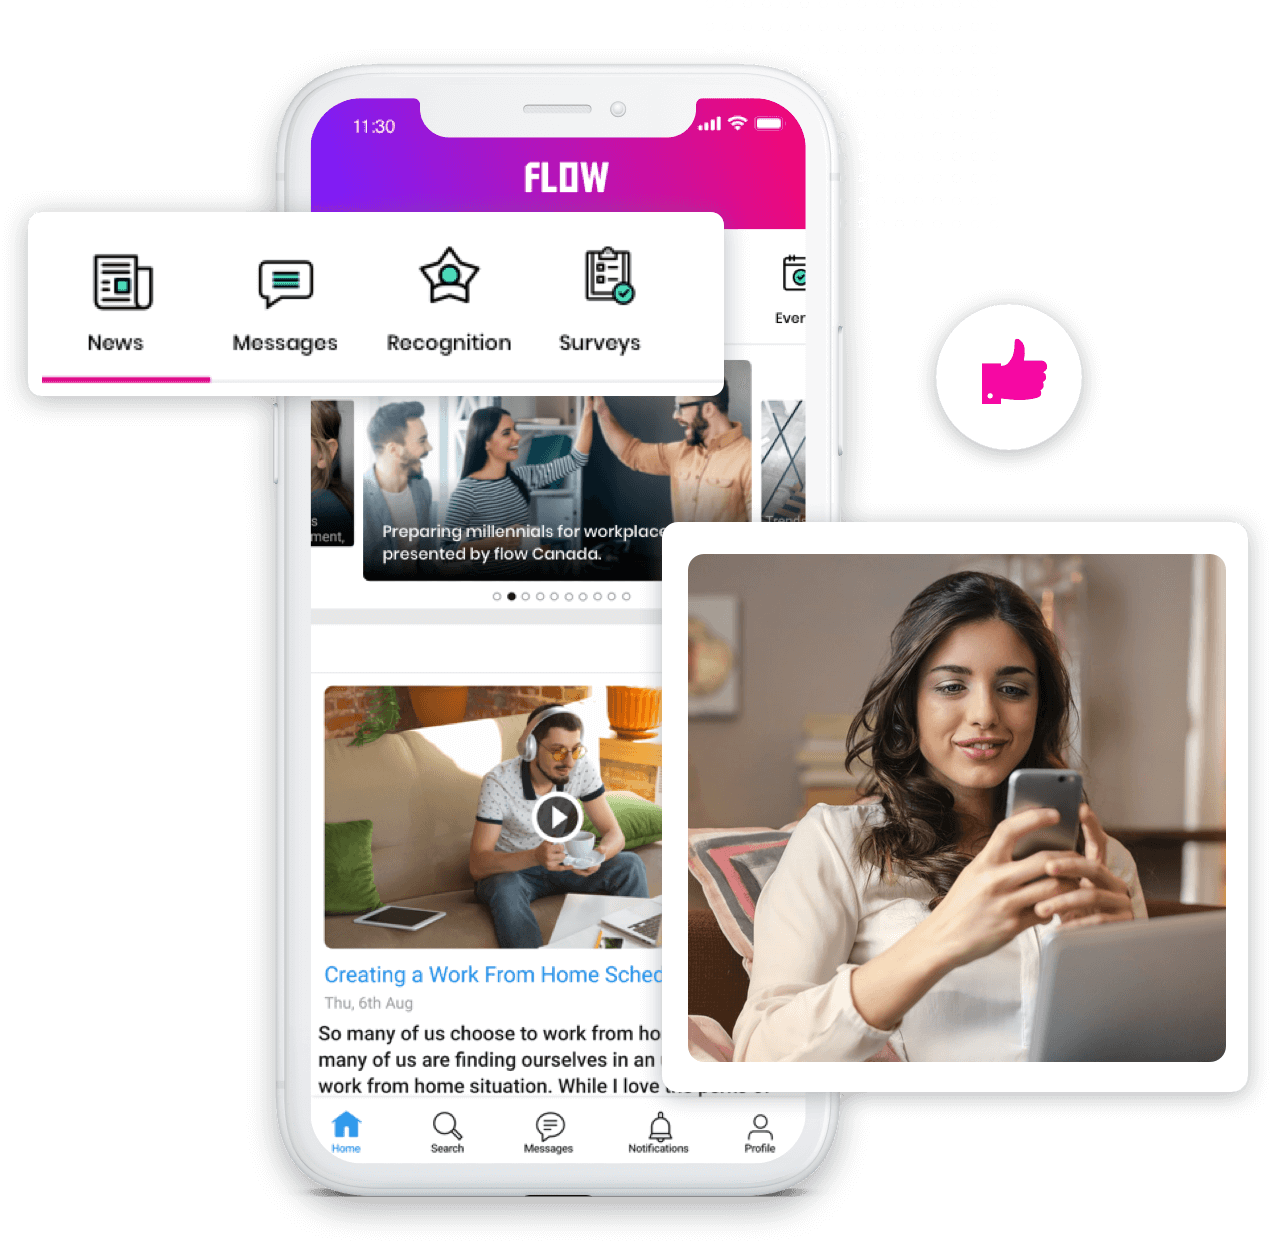 HubEngage Software - Create beautiful, powerful employee apps for iOS and Android that meet your employee communication needs while accelerating engagement fast. Reach your employees with relevant content through deep segmentation tools that makes it fun and engaging.